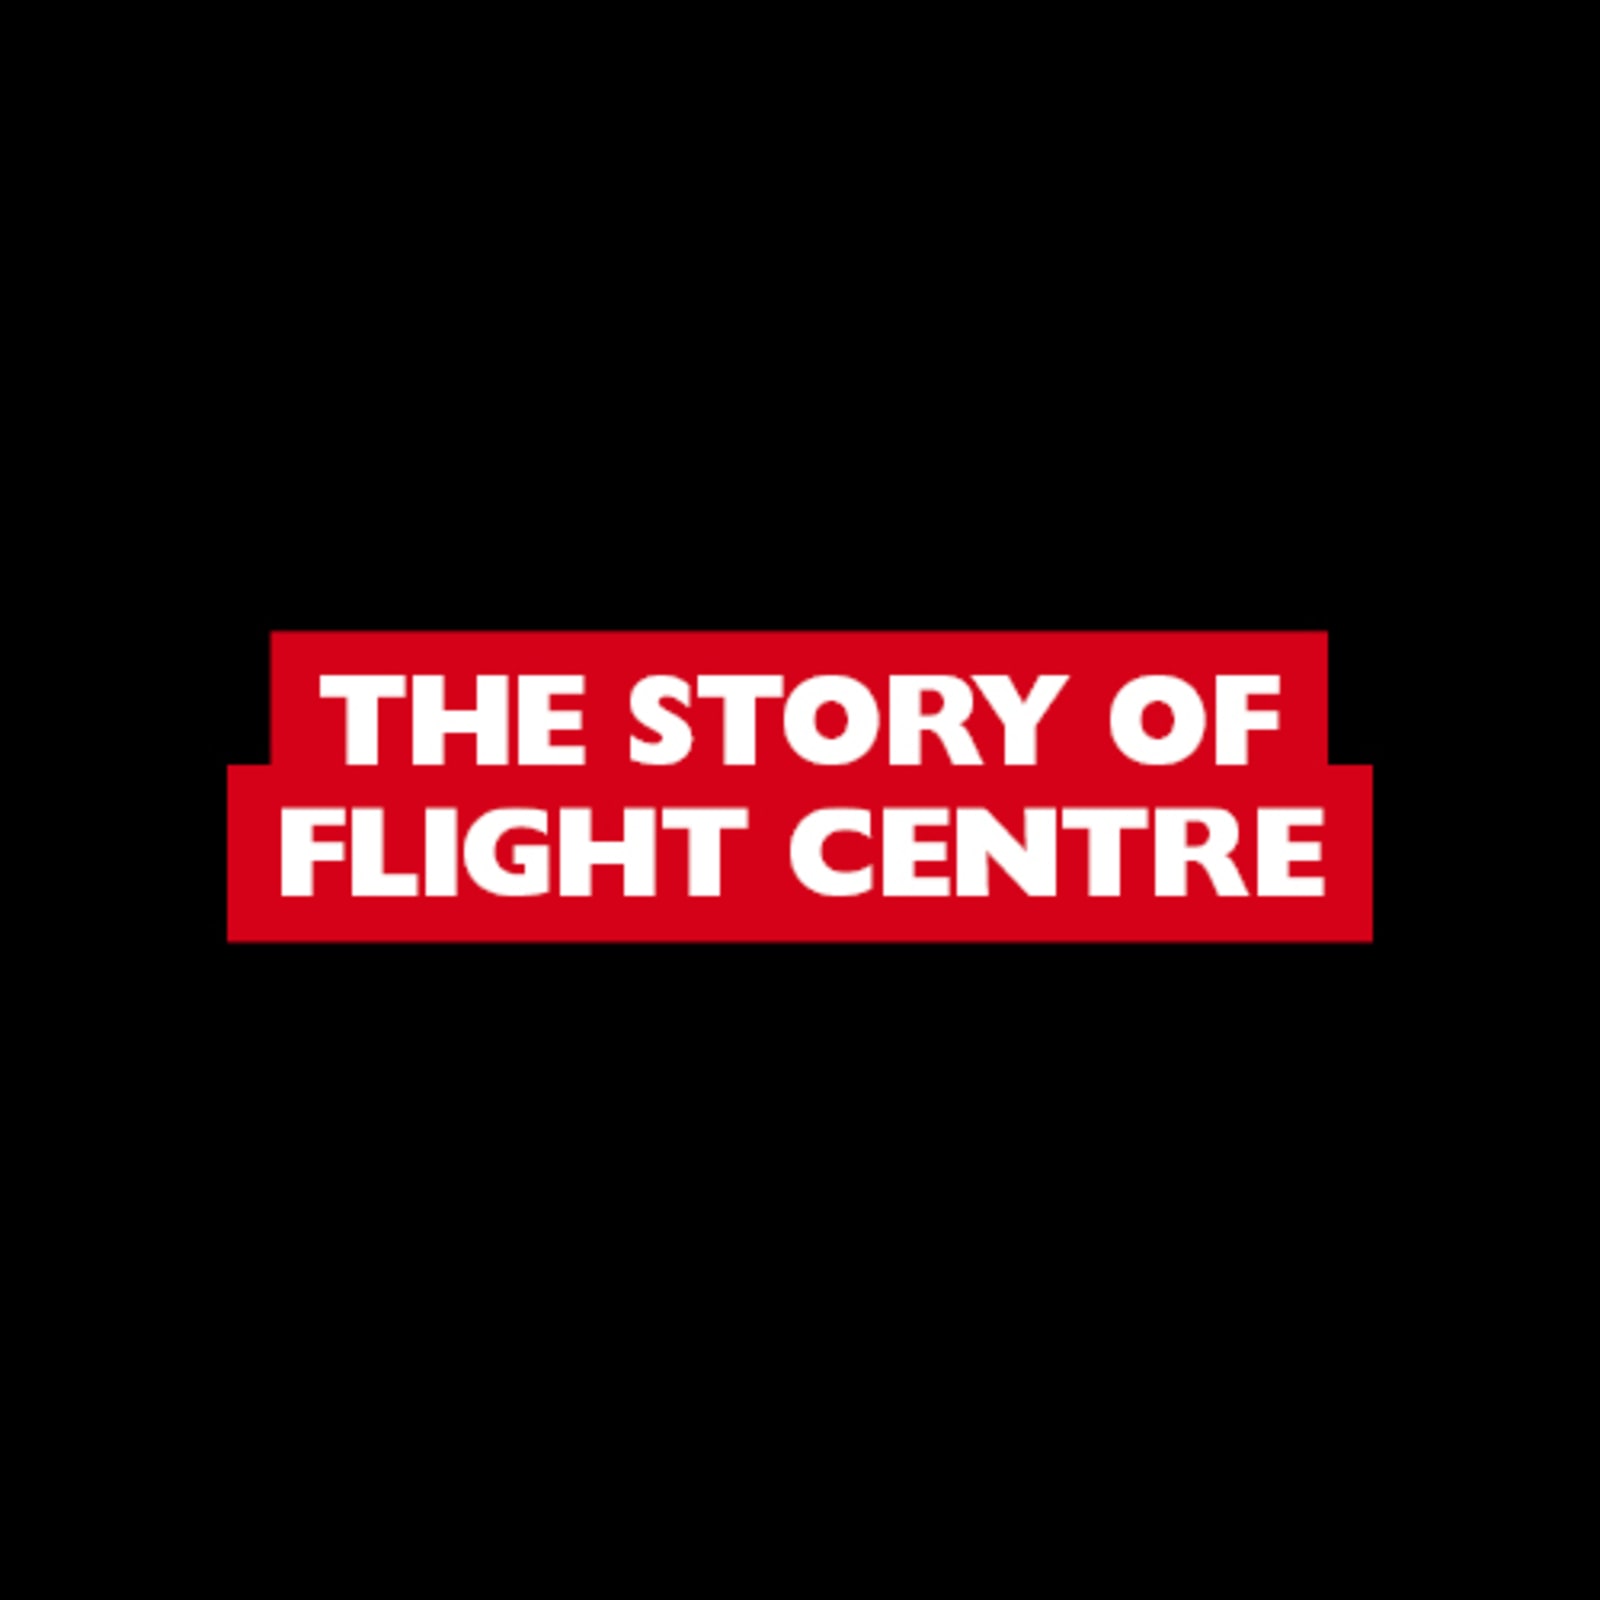 The Story of Flight Centre